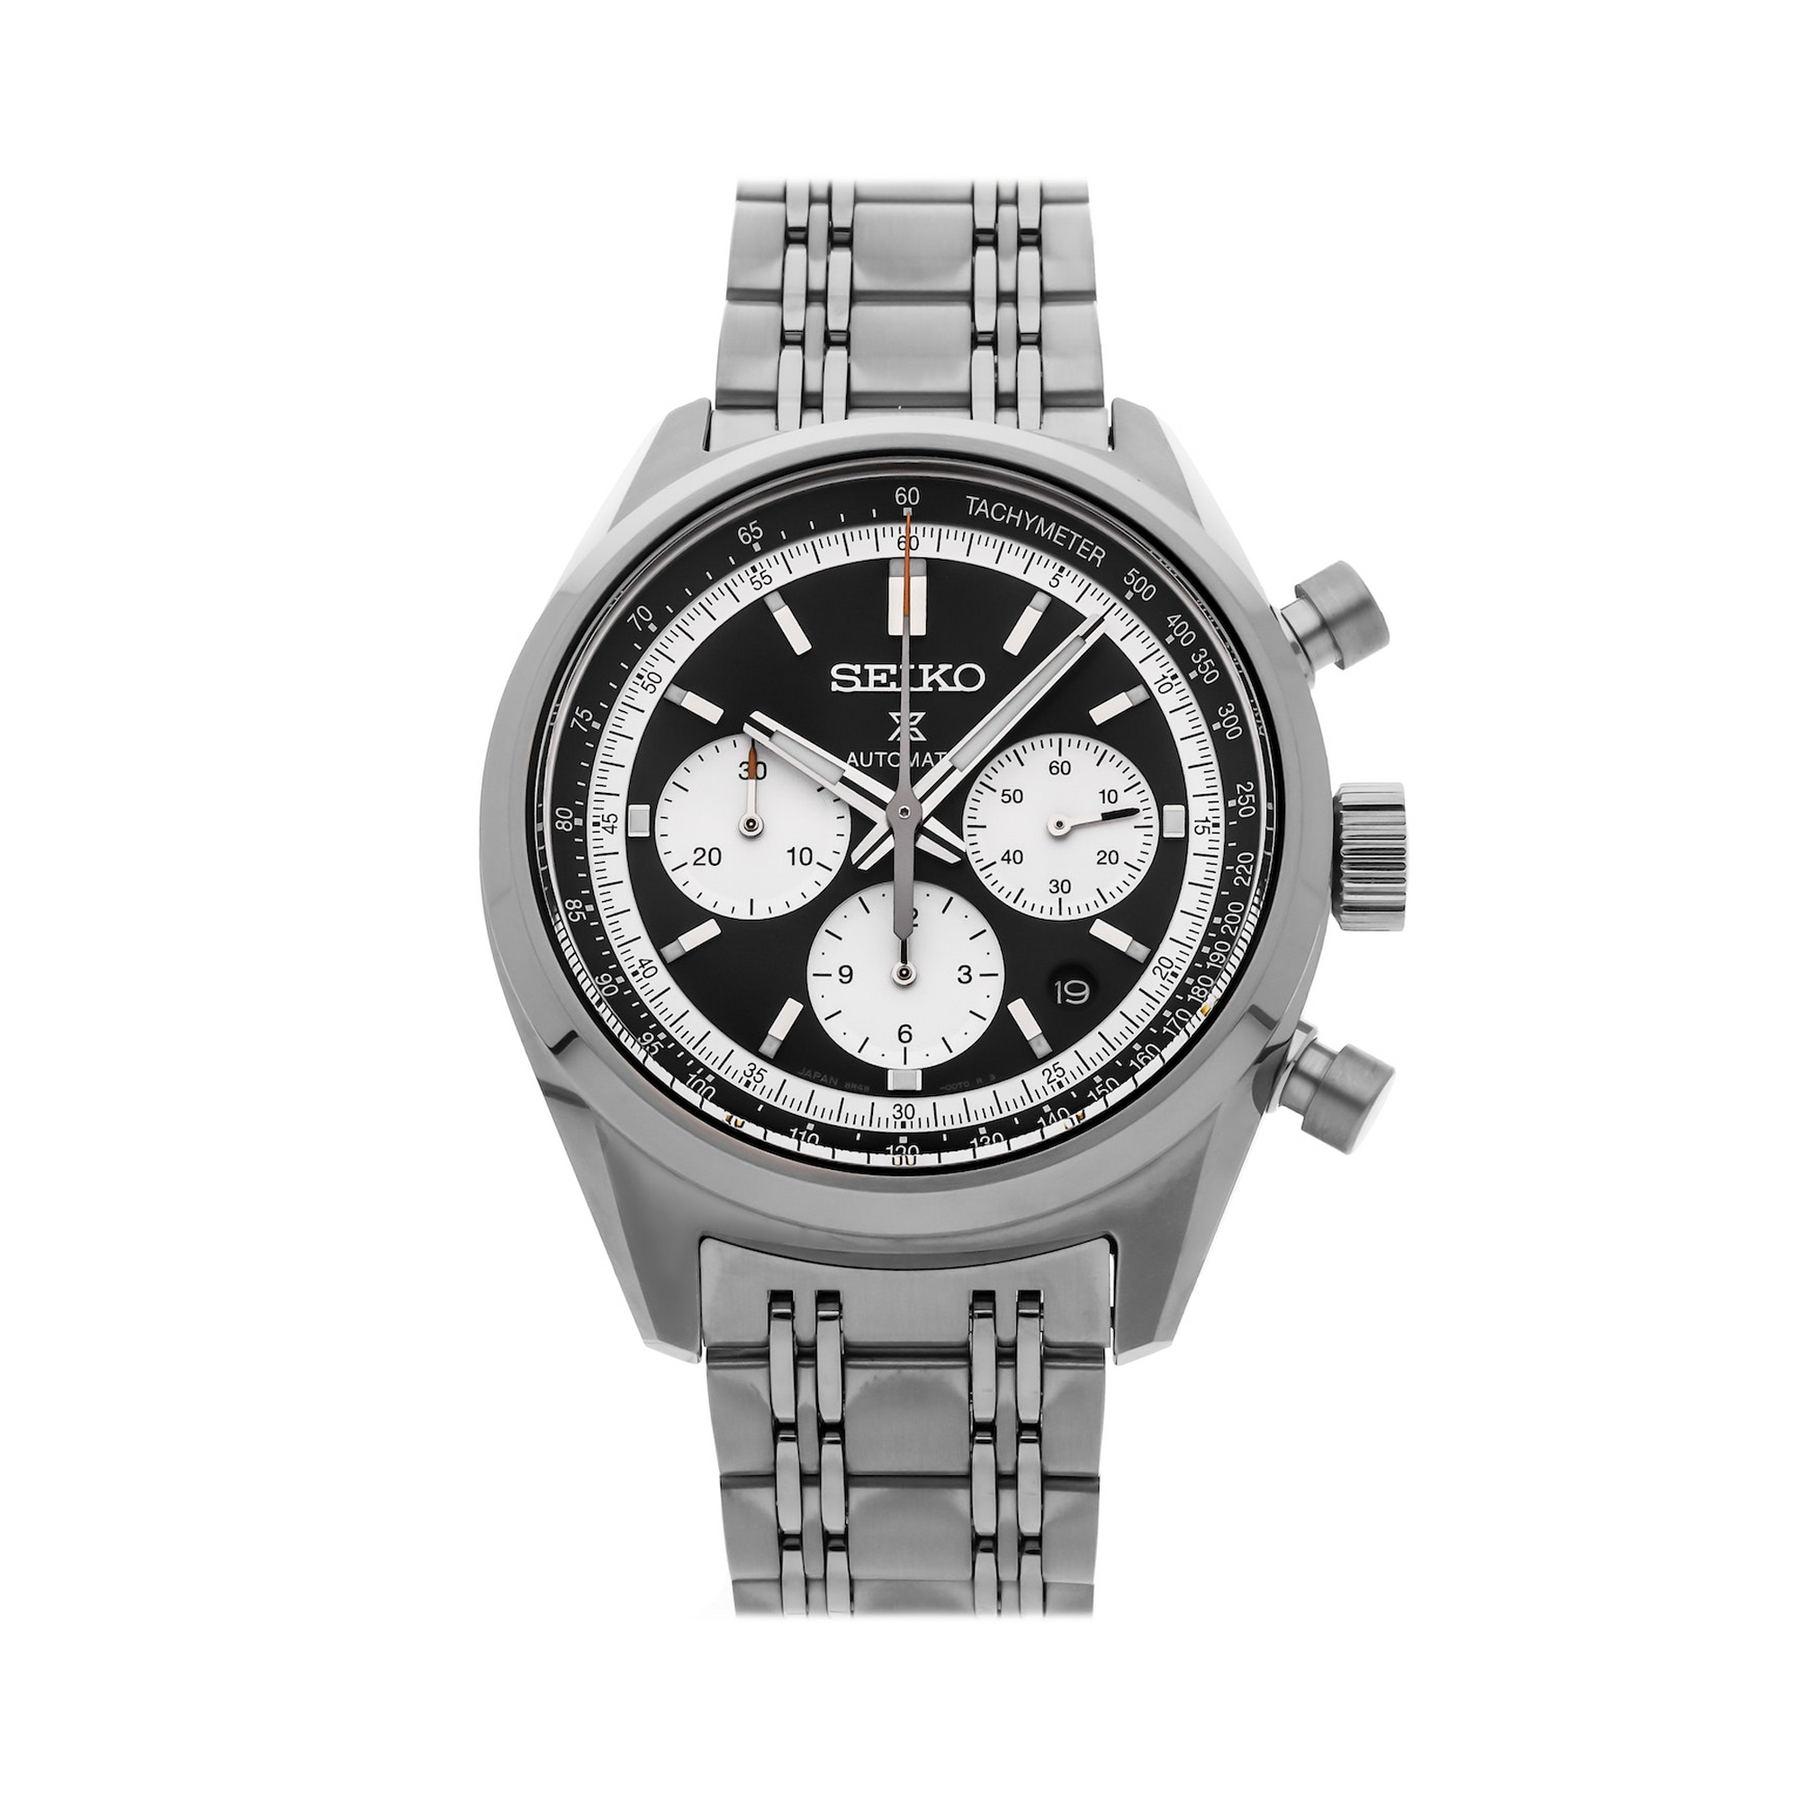 Seiko Prospex Speedtimer 100th Anniversary Limited Edition Men's 42mm Stainless Steel Automatic Chronograph Watch